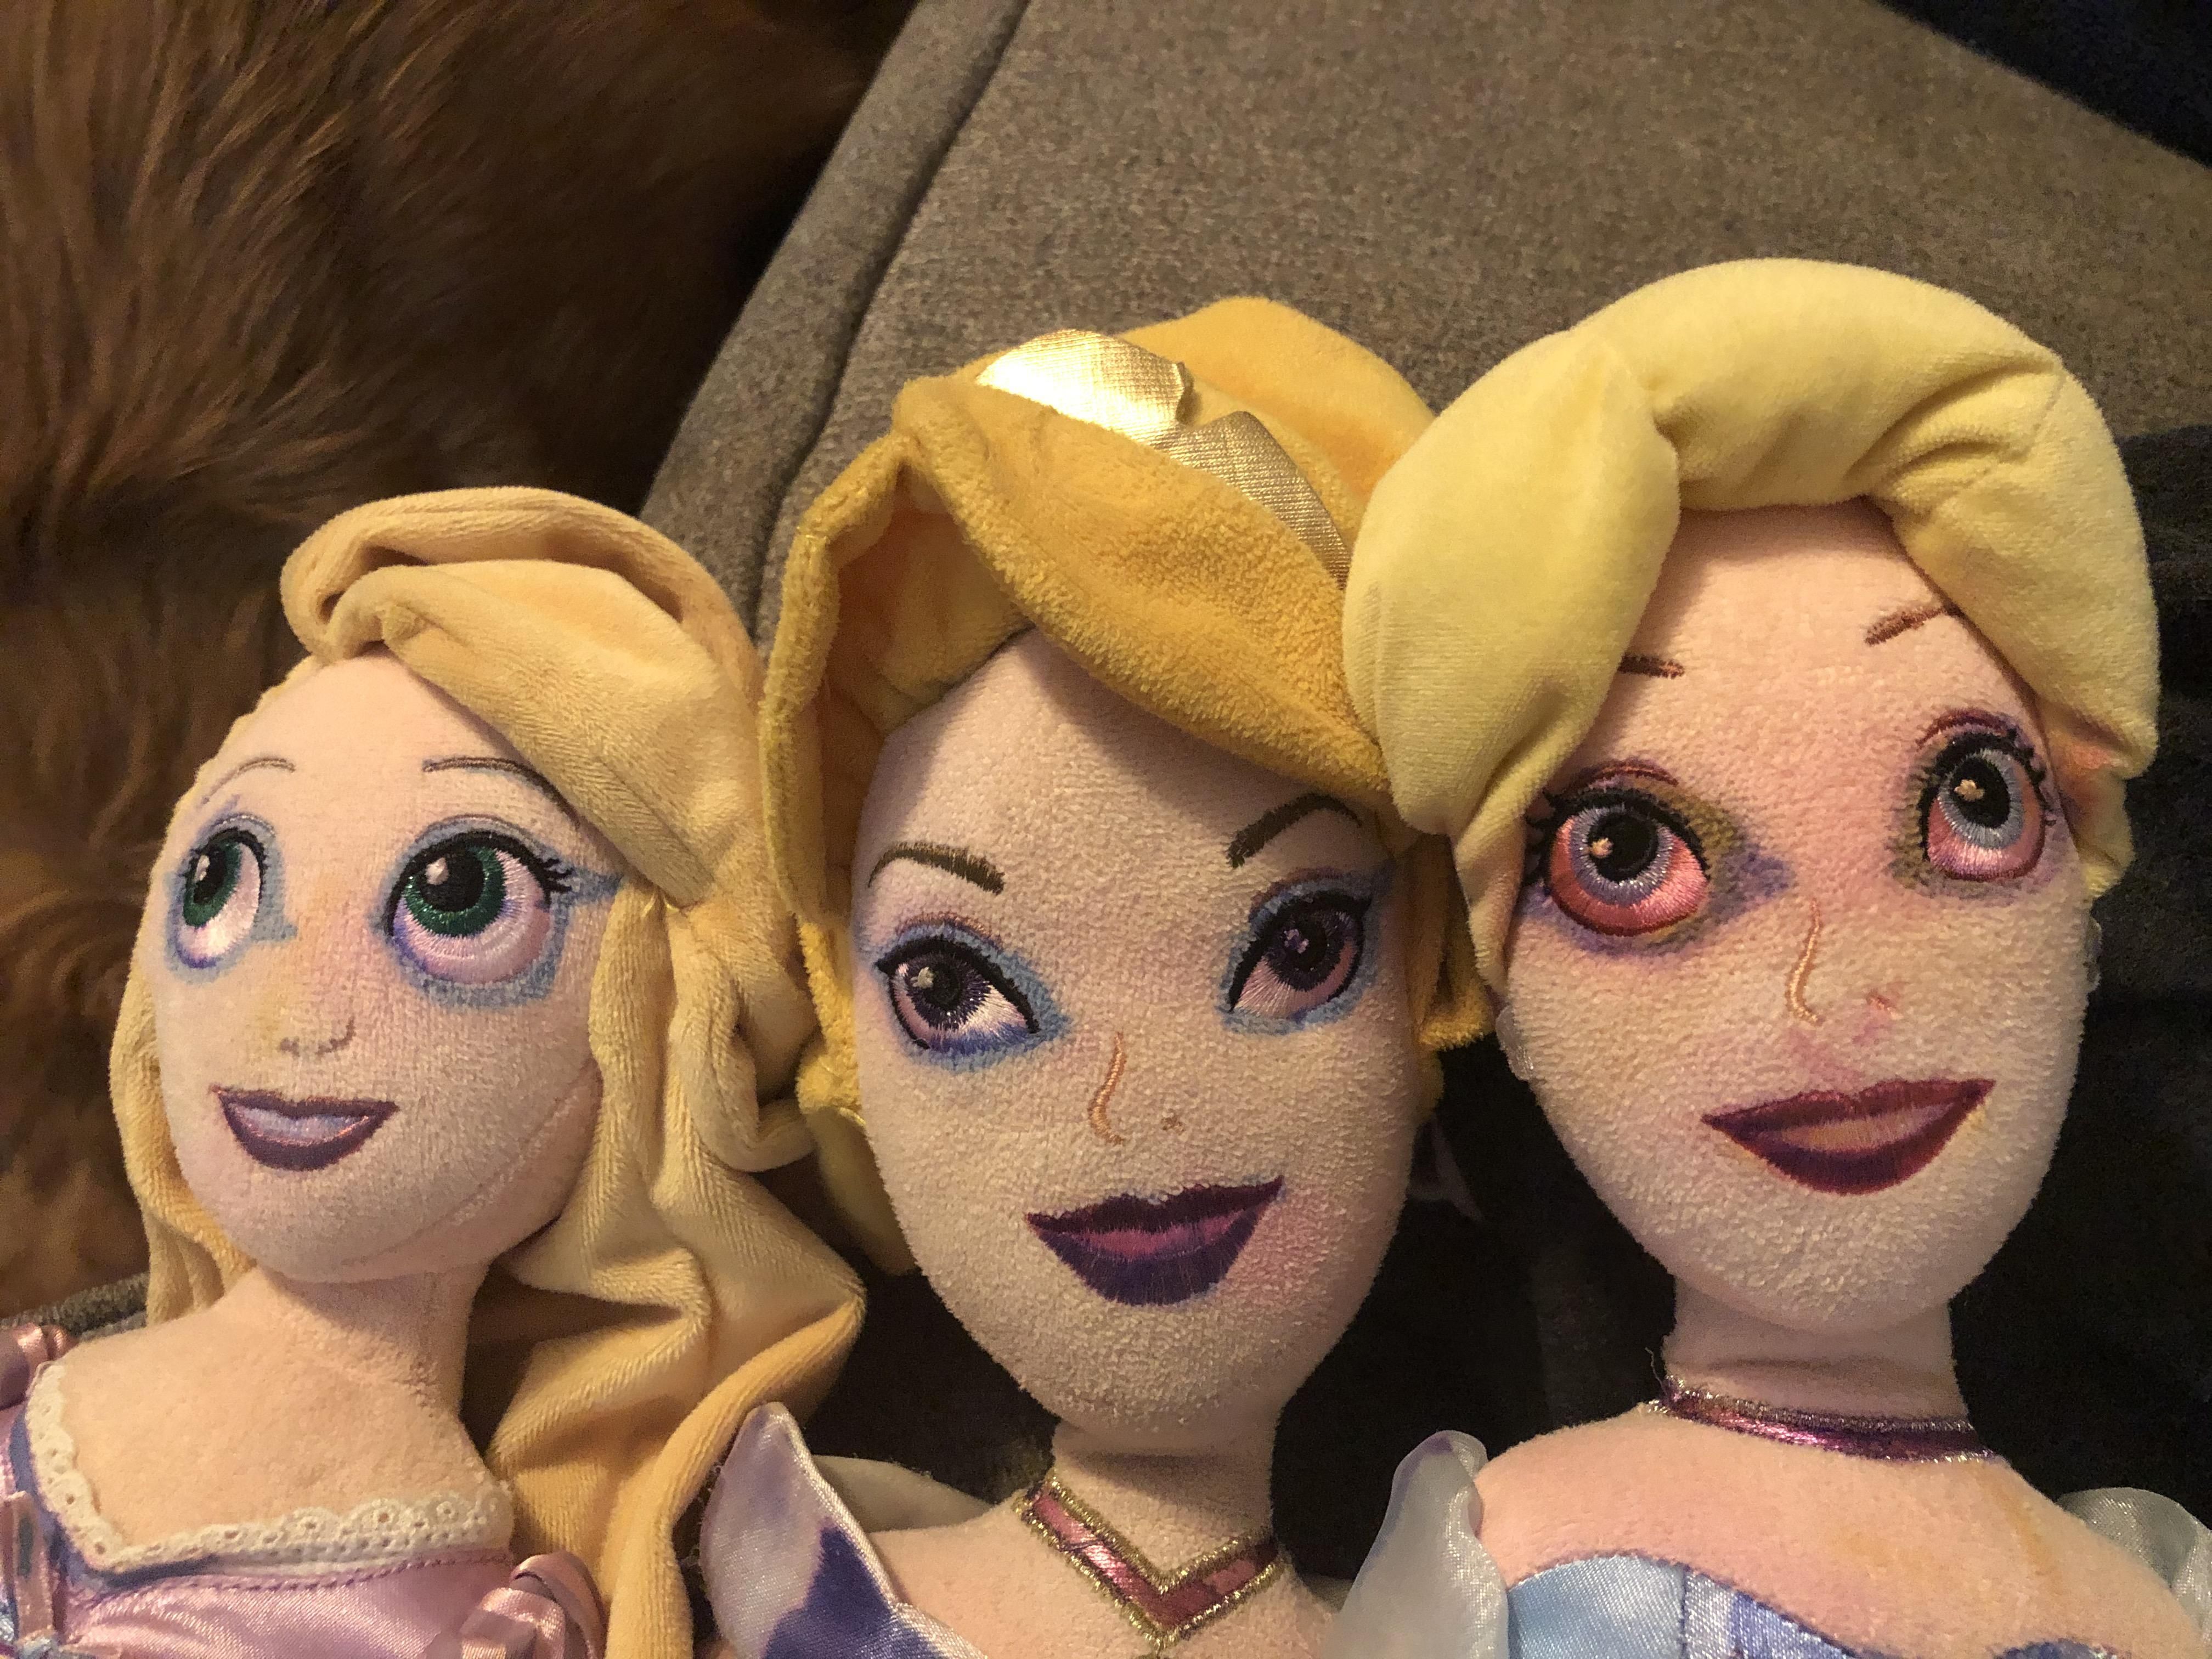 My daughter used markers to put “makeup” on her dolls. I tried to wash them. Cinderella had an especially rough night.